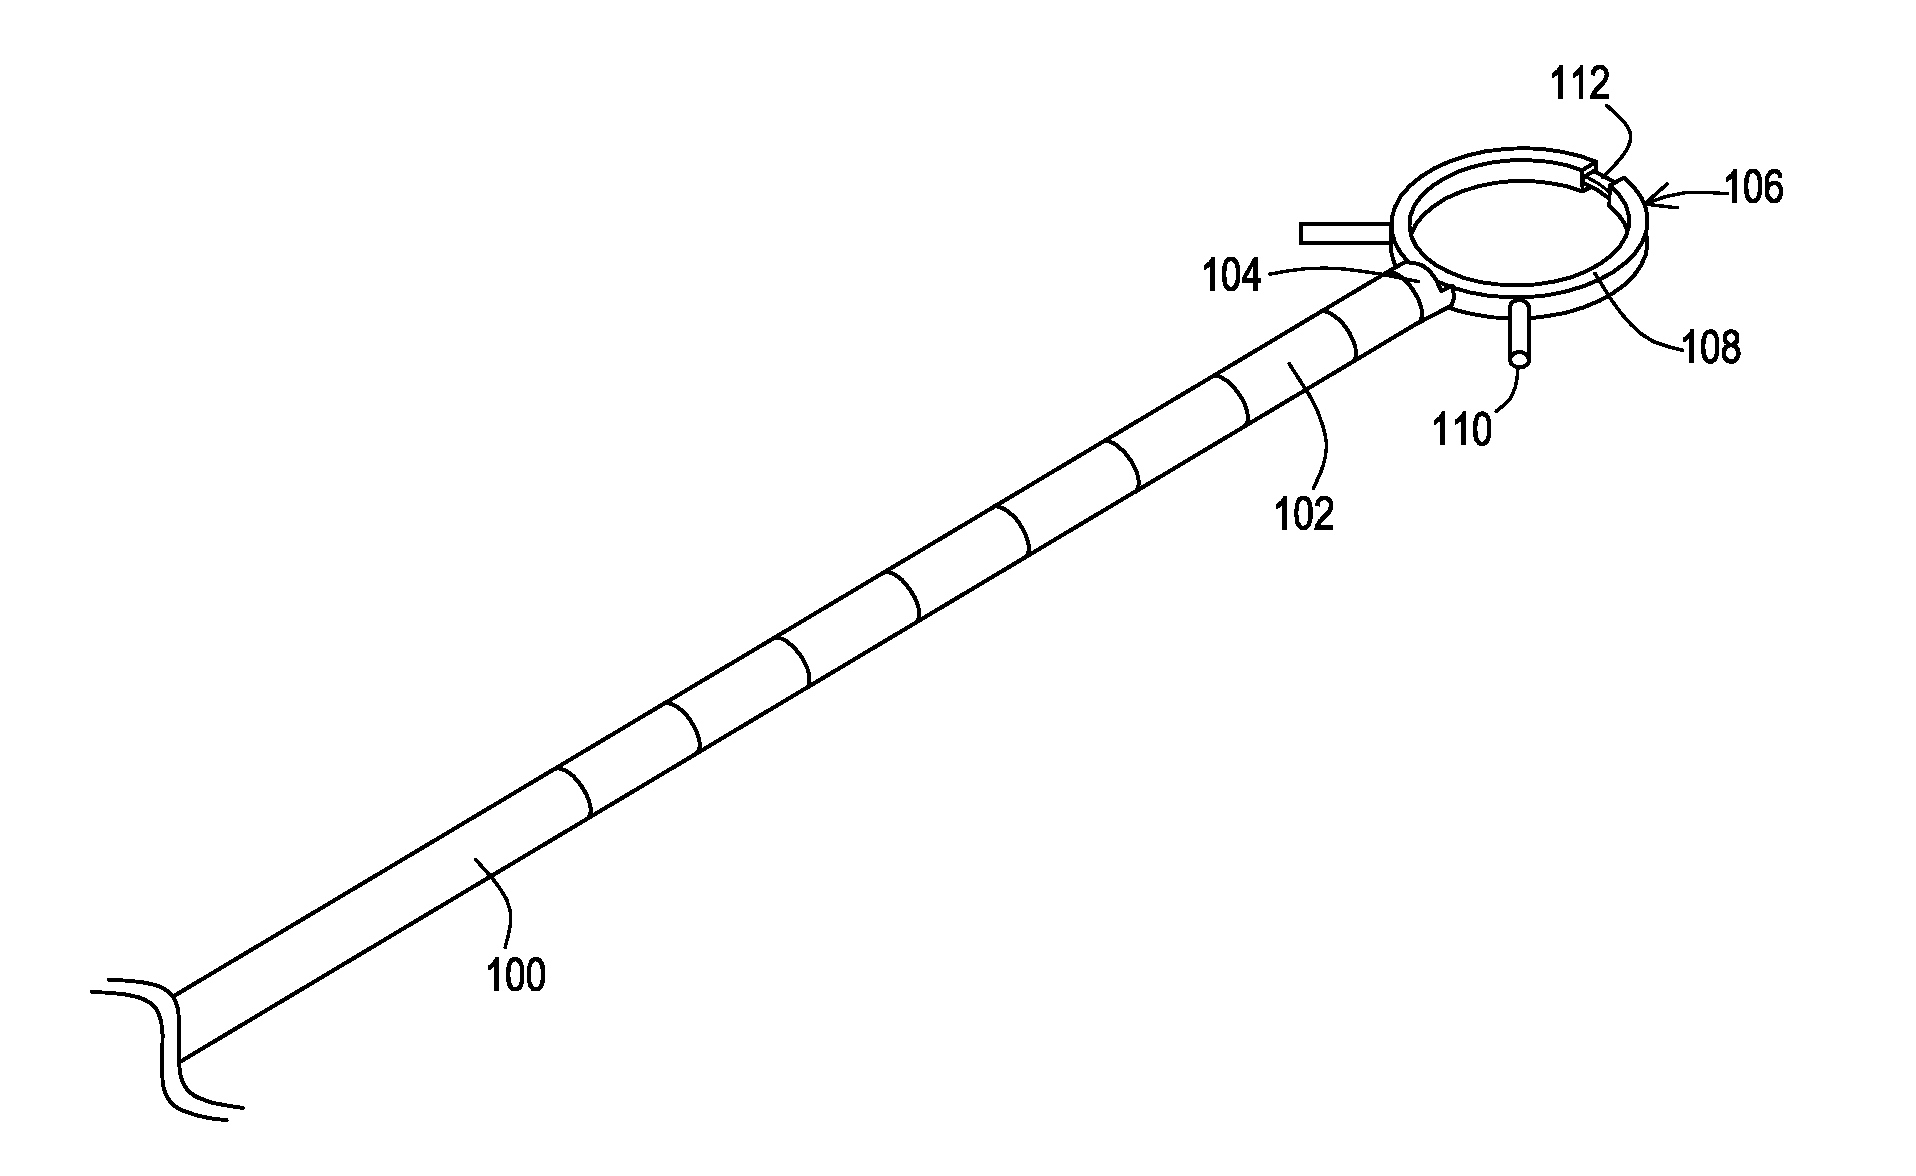 Methods, Tools, and Assemblies for Implantation of Medical Leads Having Distal Tip Anchors